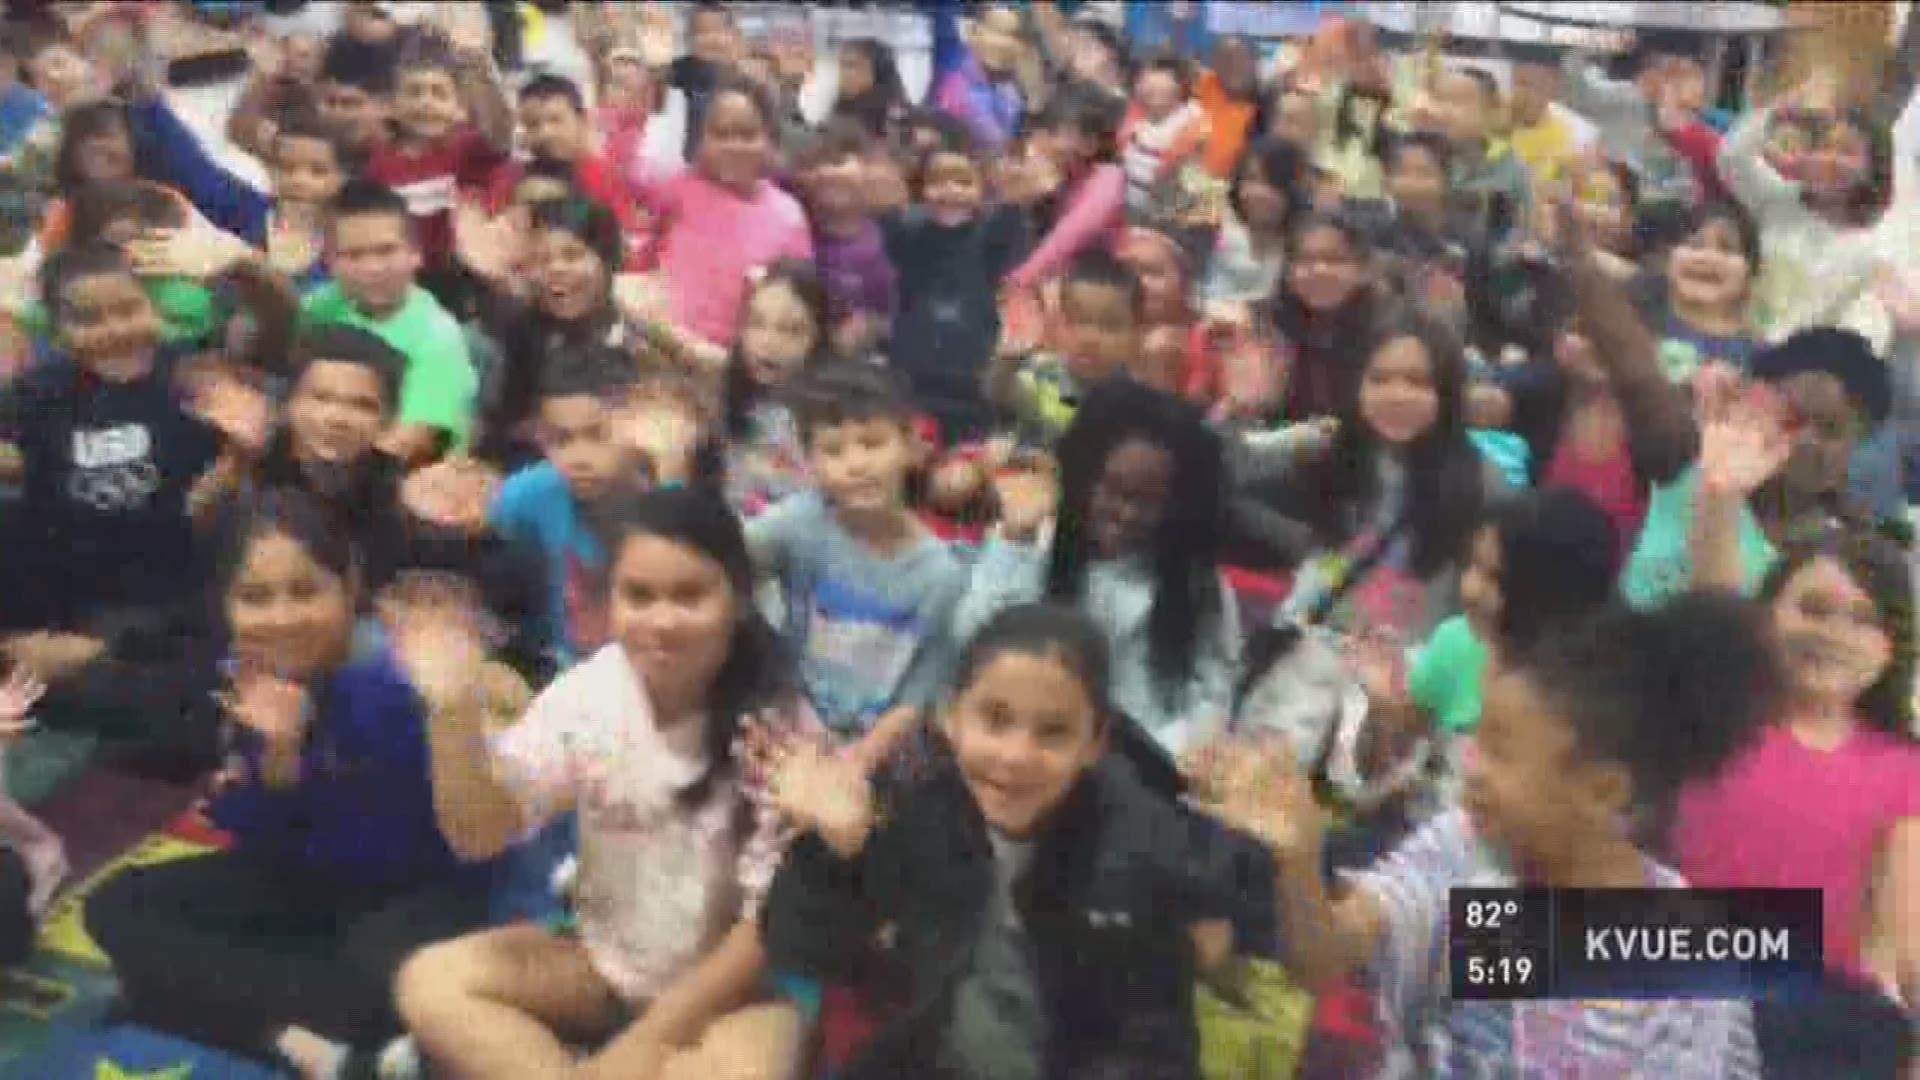 Storm Team Meteorologist Nathan Gogo visited third graders at Pleasant Hill Elementary in South Austin on Monday.